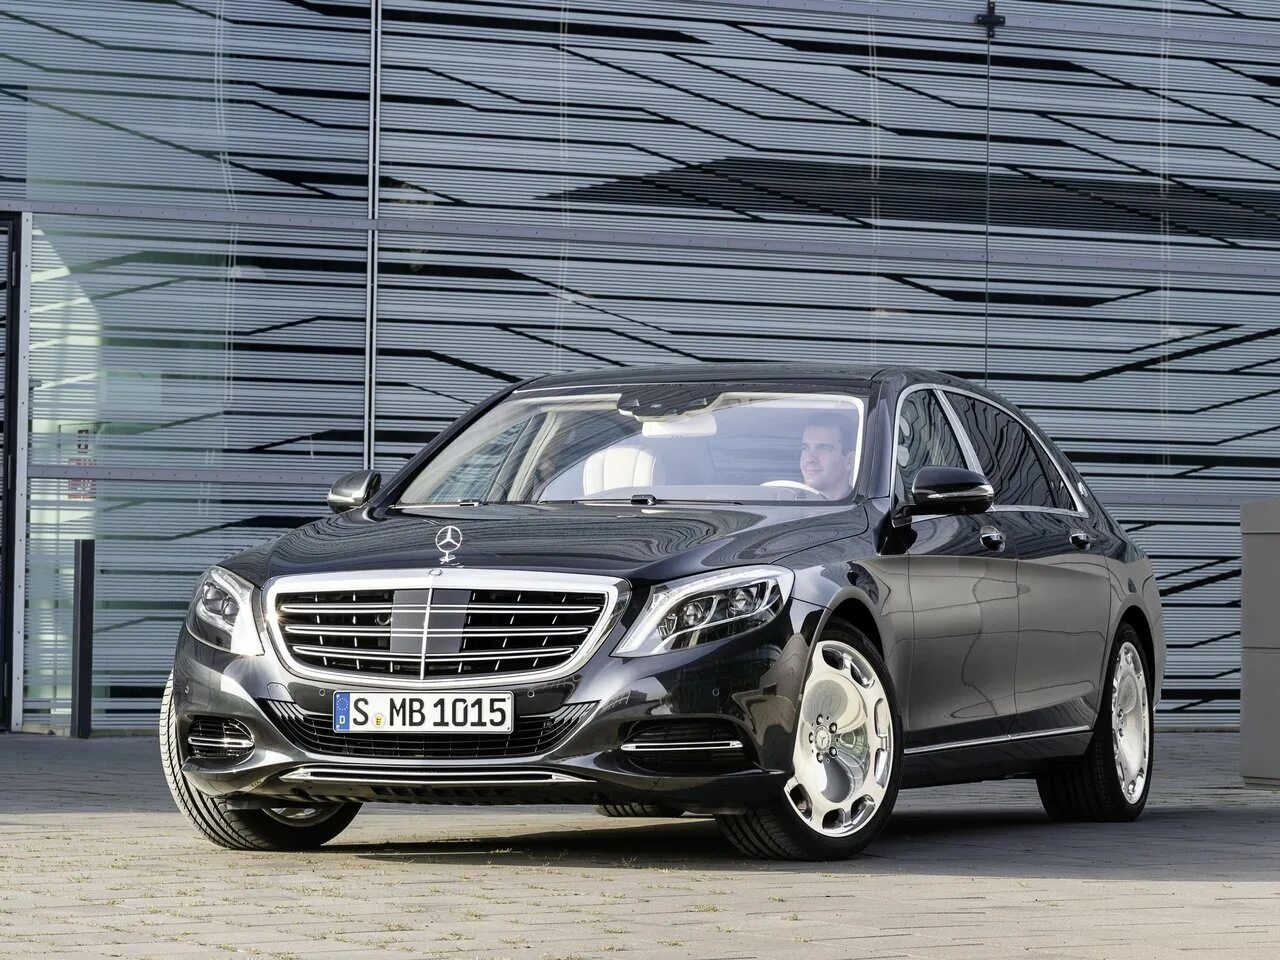 Mercedes Benz Maybach. Мерседес Бенц Майбах s600. Mercedes Benz 222 Maybach. Mercedes Benz s class Maybach. Мерседес s майбах